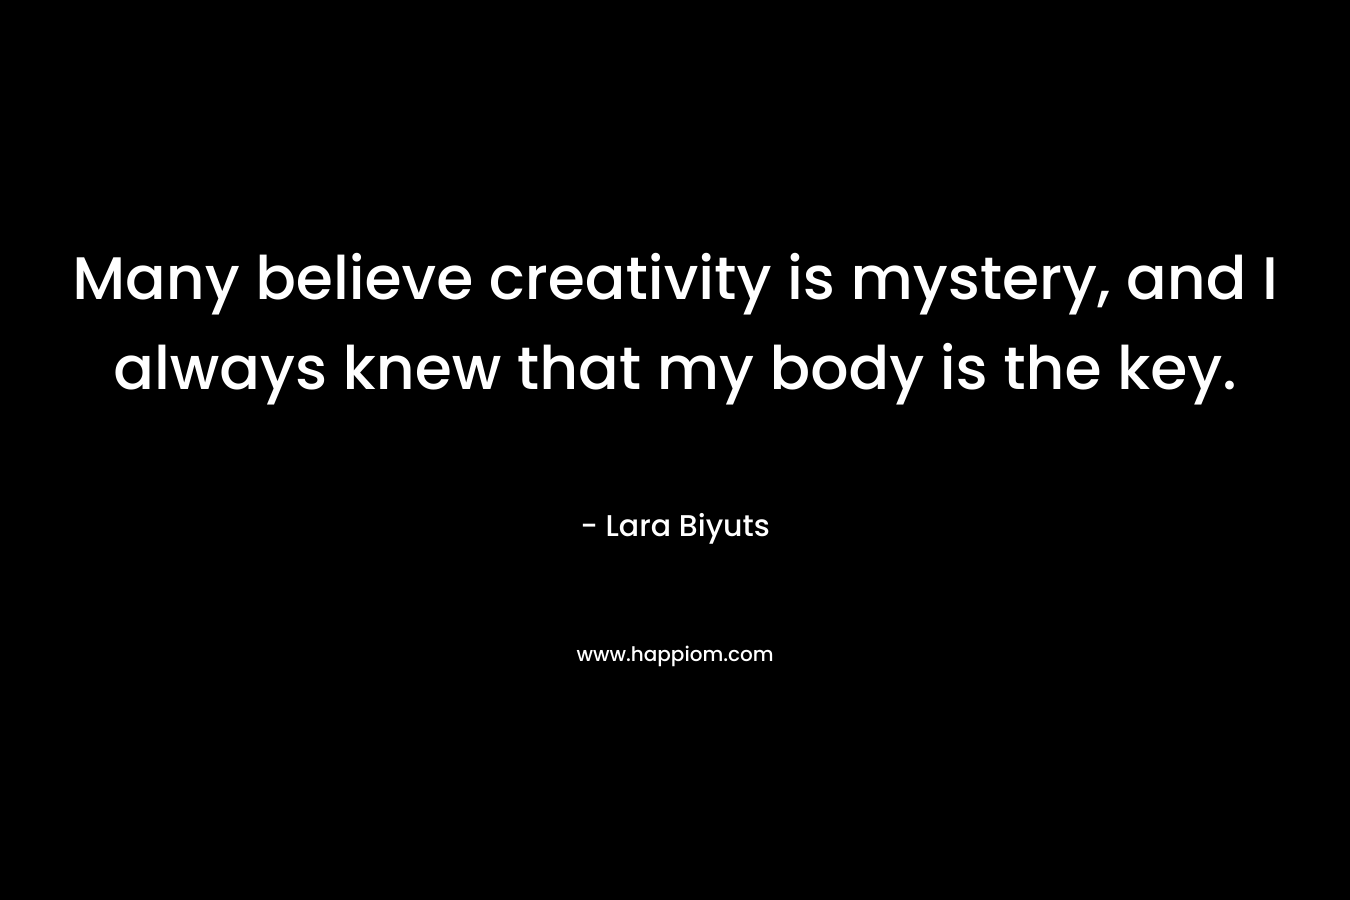 Many believe creativity is mystery, and I always knew that my body is the key.